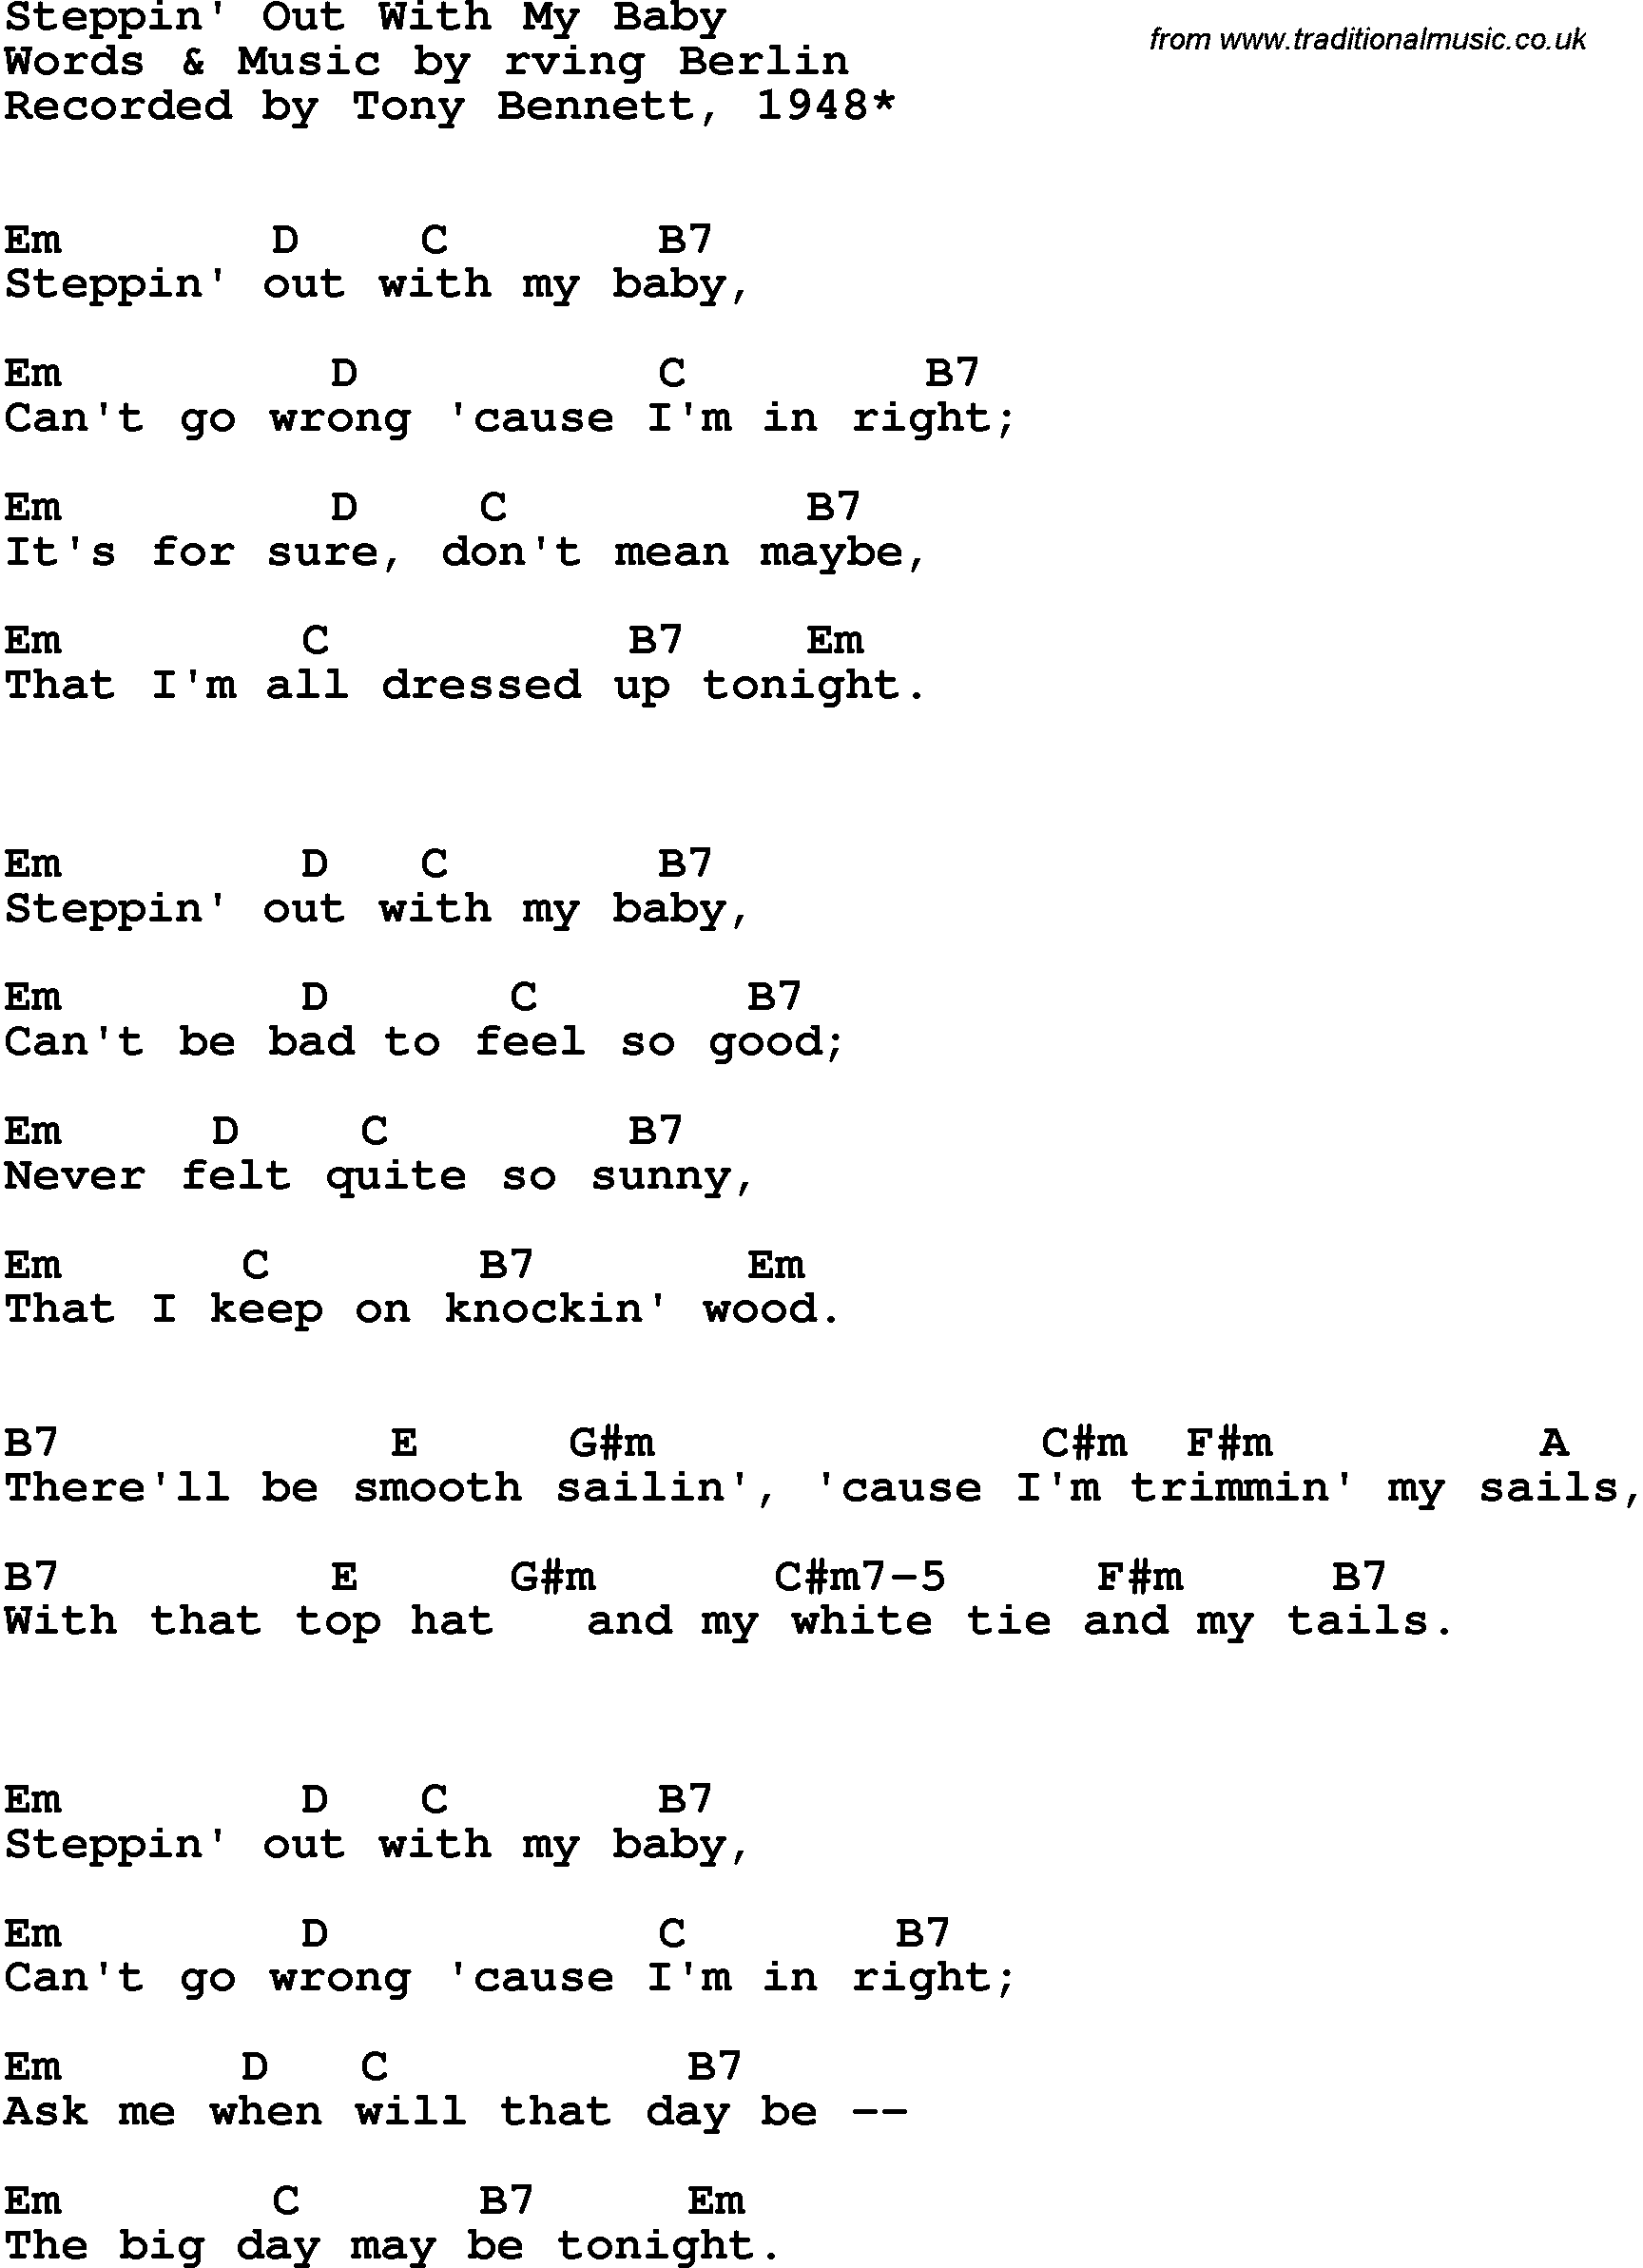 Song Lyrics with guitar chords for Steppin' Out With My Baby - Tony Bennett, 1948